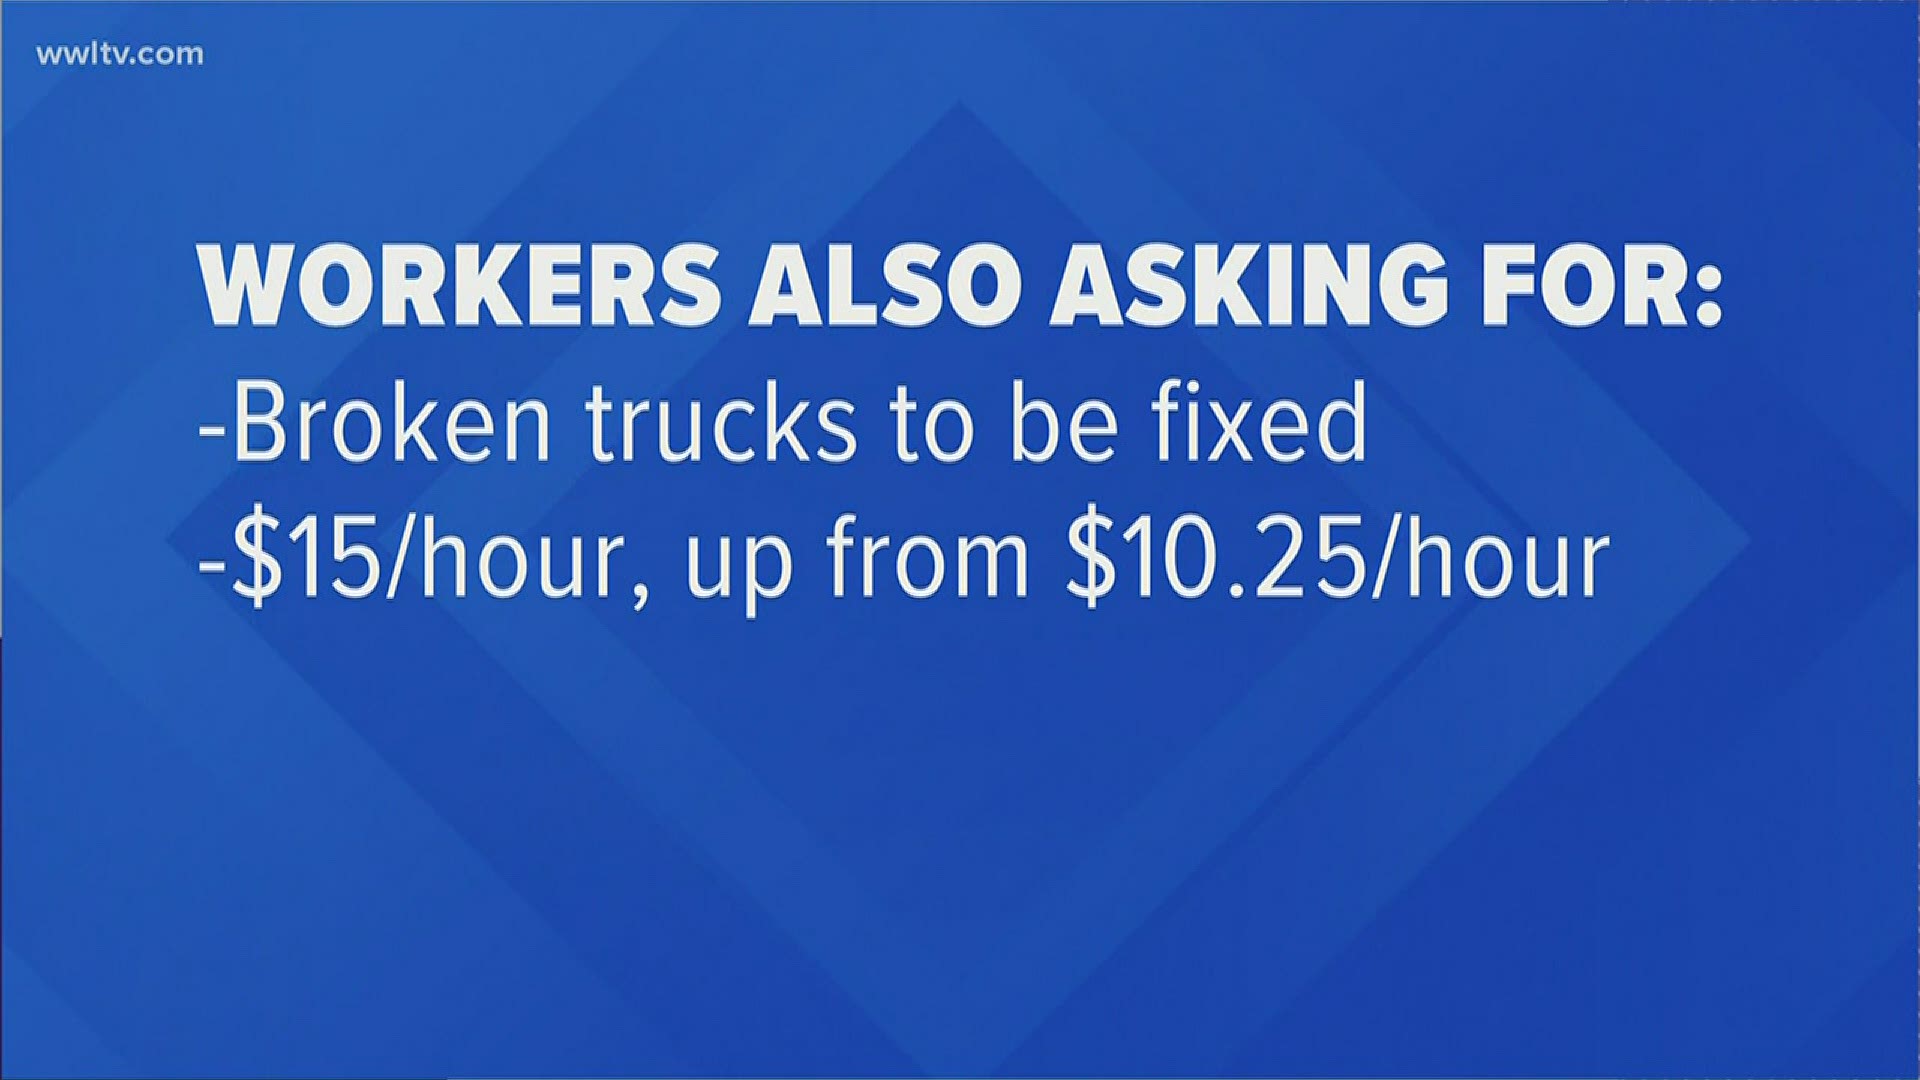 Workers are also asking for broken trucks to be fixed and an increased hourly rate of $15, up from $10.25.